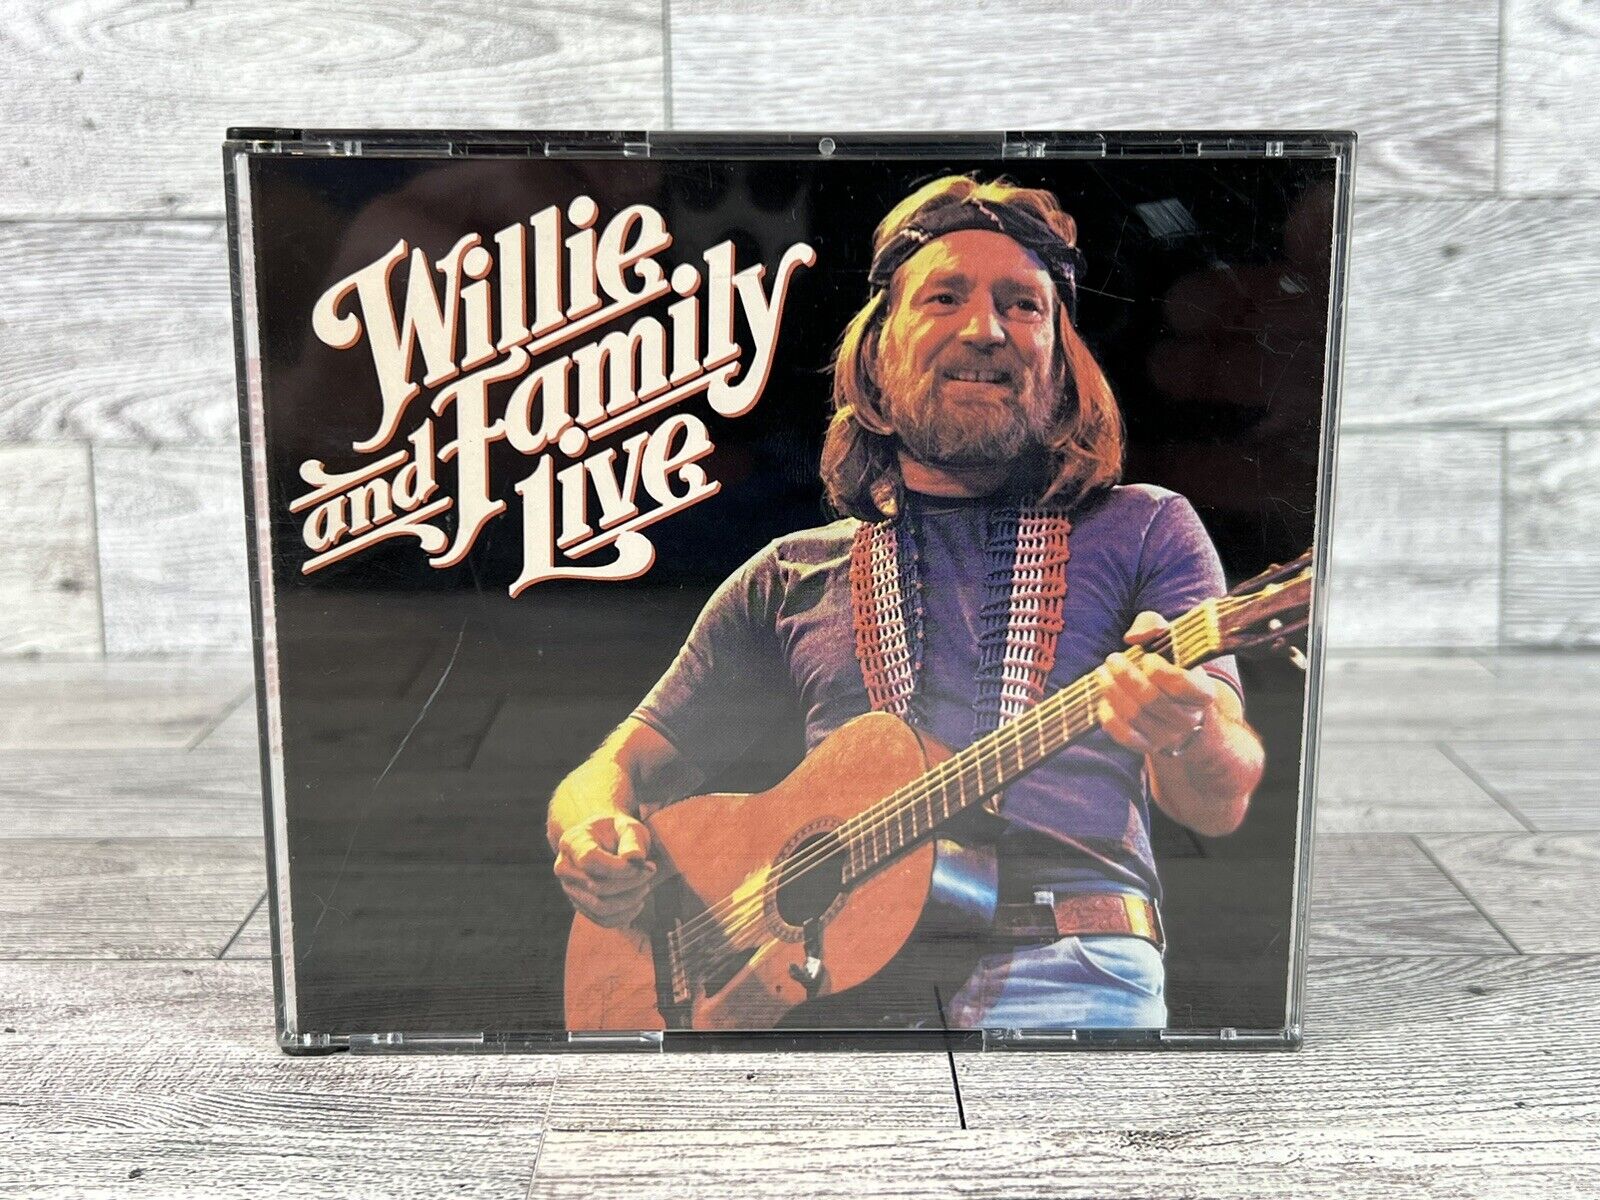 Willie and Family Live [Expanded] [Remaster] by Willie Nelson (CD, June 2003)